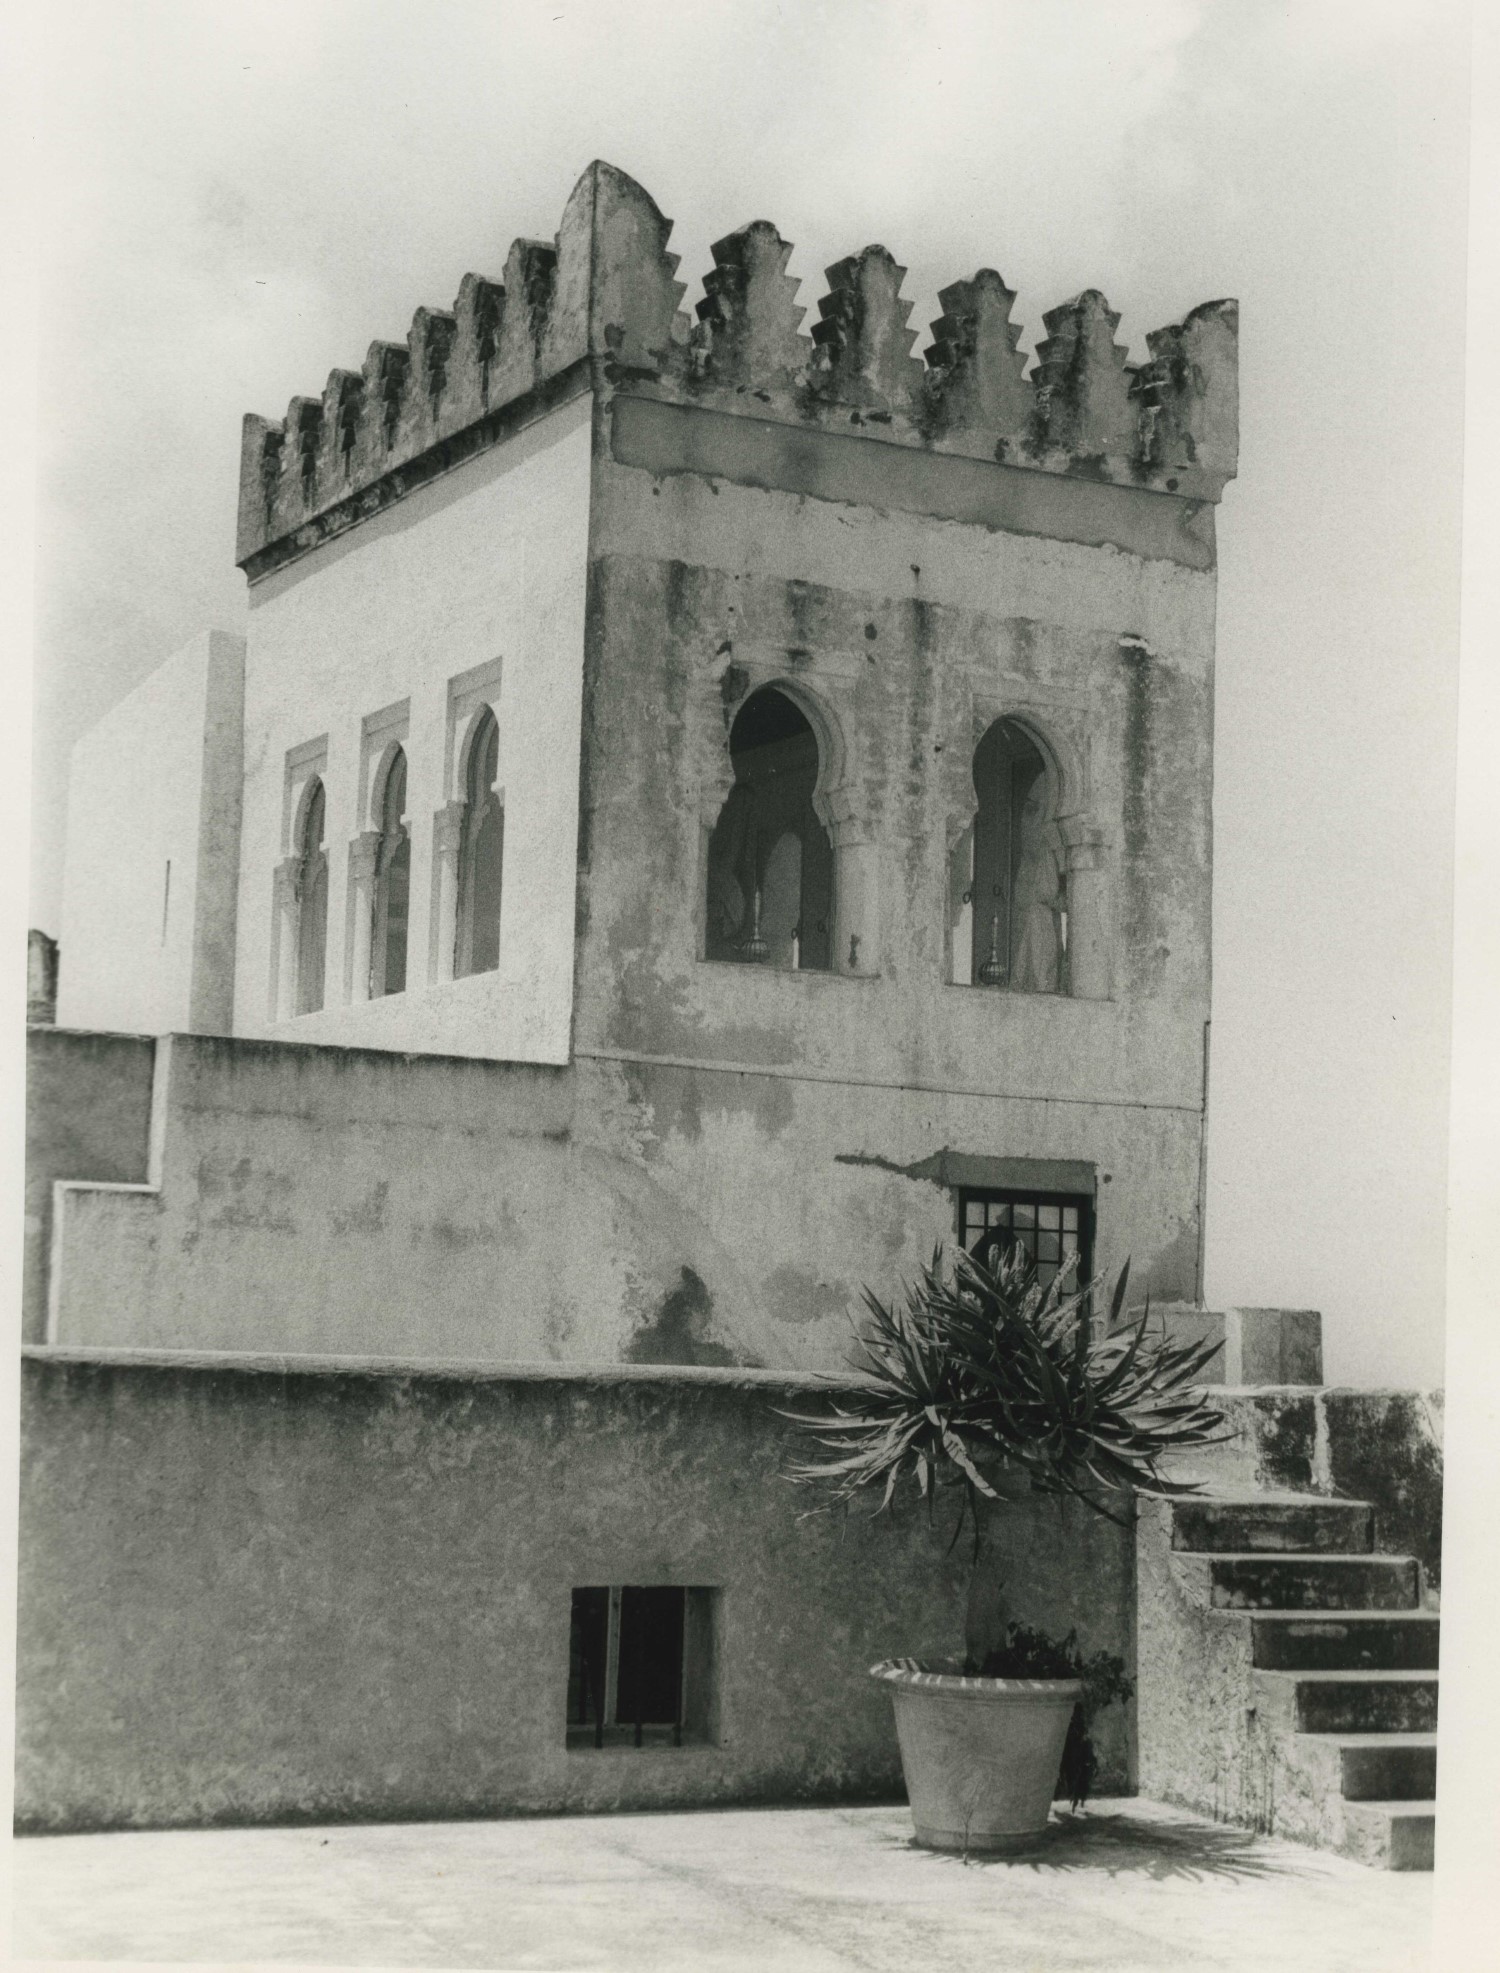 Terrace atop of a home in the Kasbah